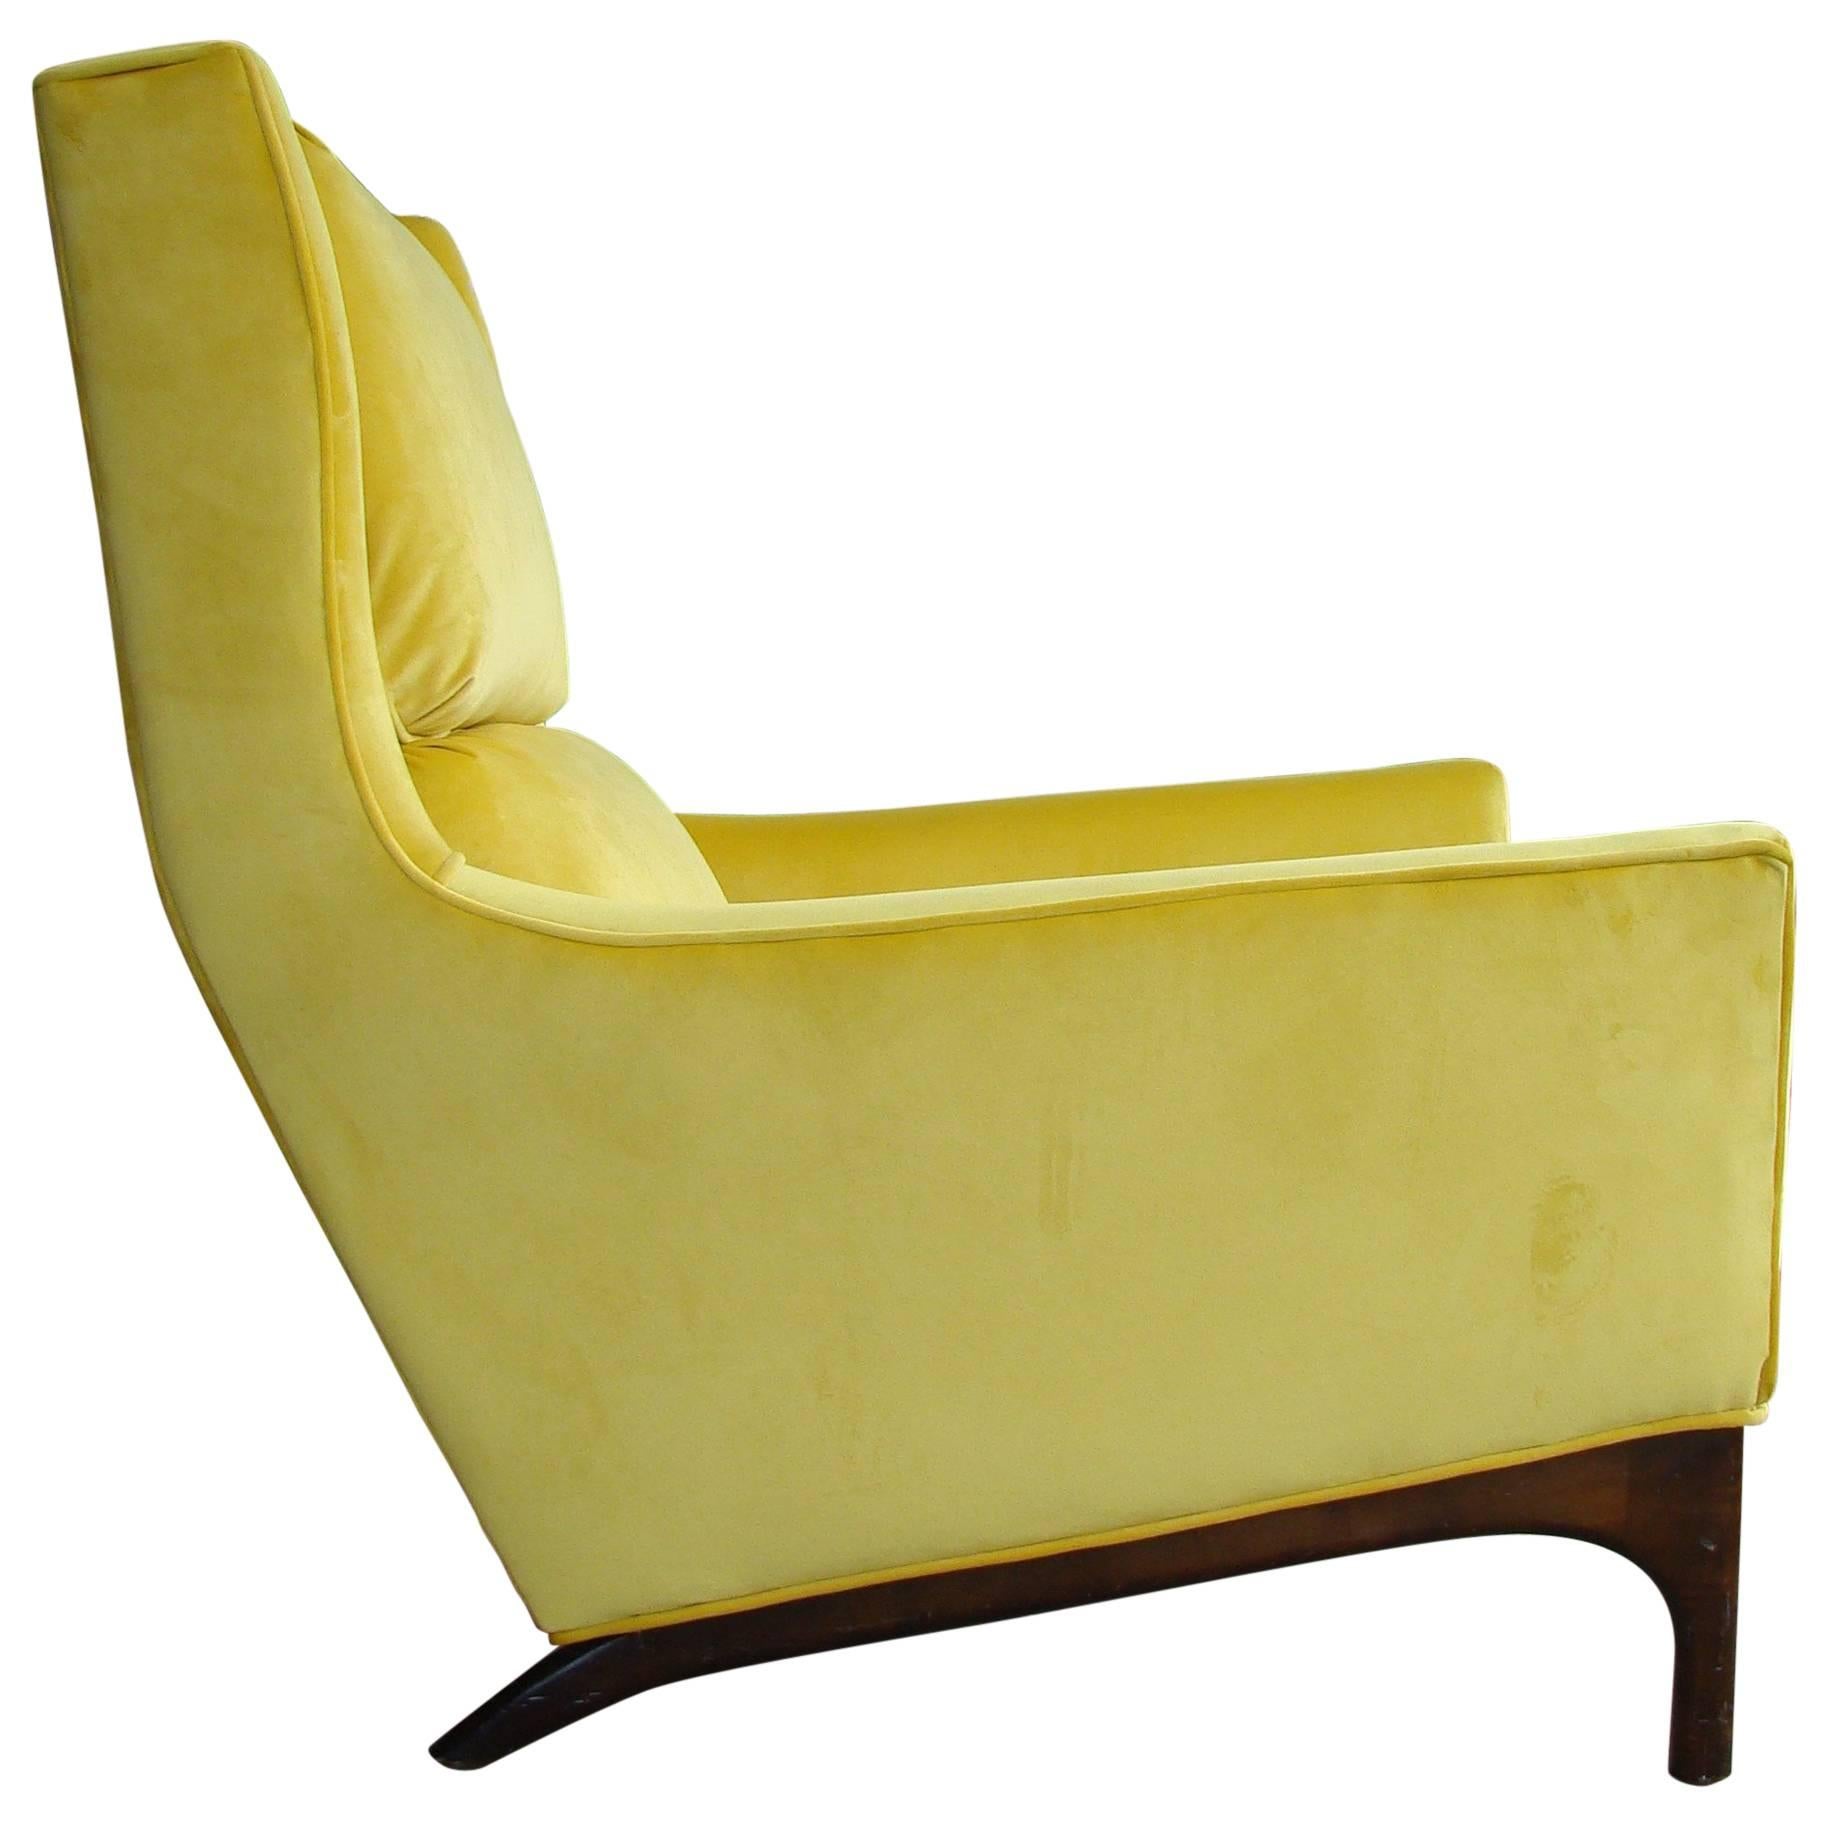 Vintage, 1960s Yellow Citrine Italian Wingback Upholstered Lounge Chair